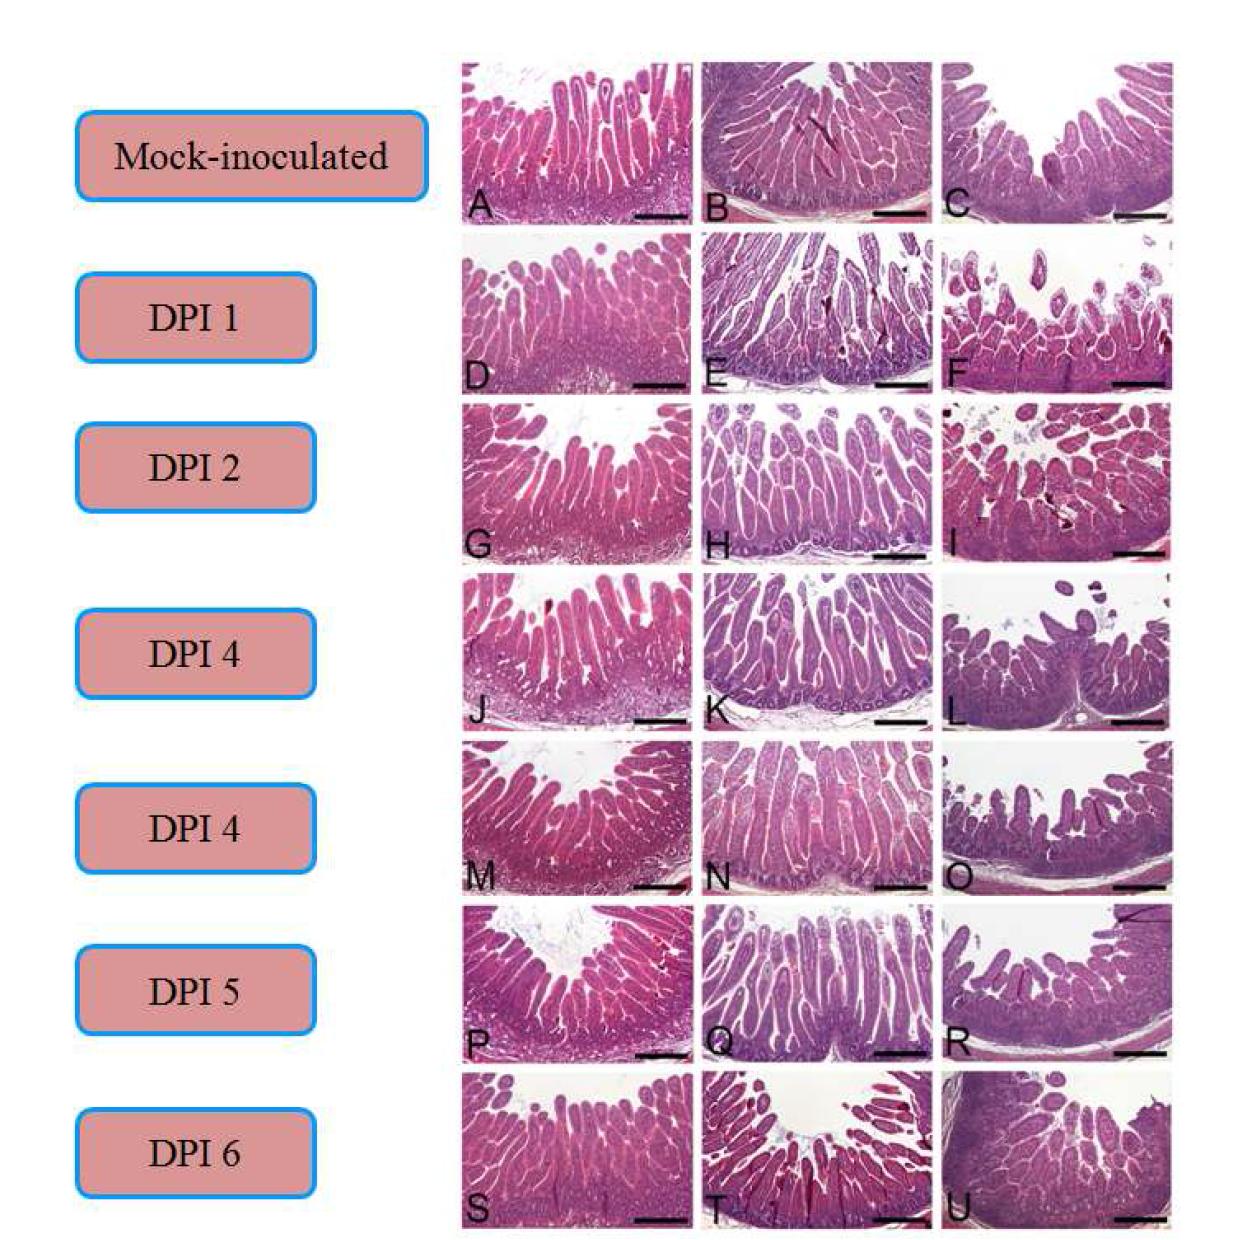 Histopathological findings of the small intestine in colostrums-derpived piglets inoculated with human rotavirus Wa strain.